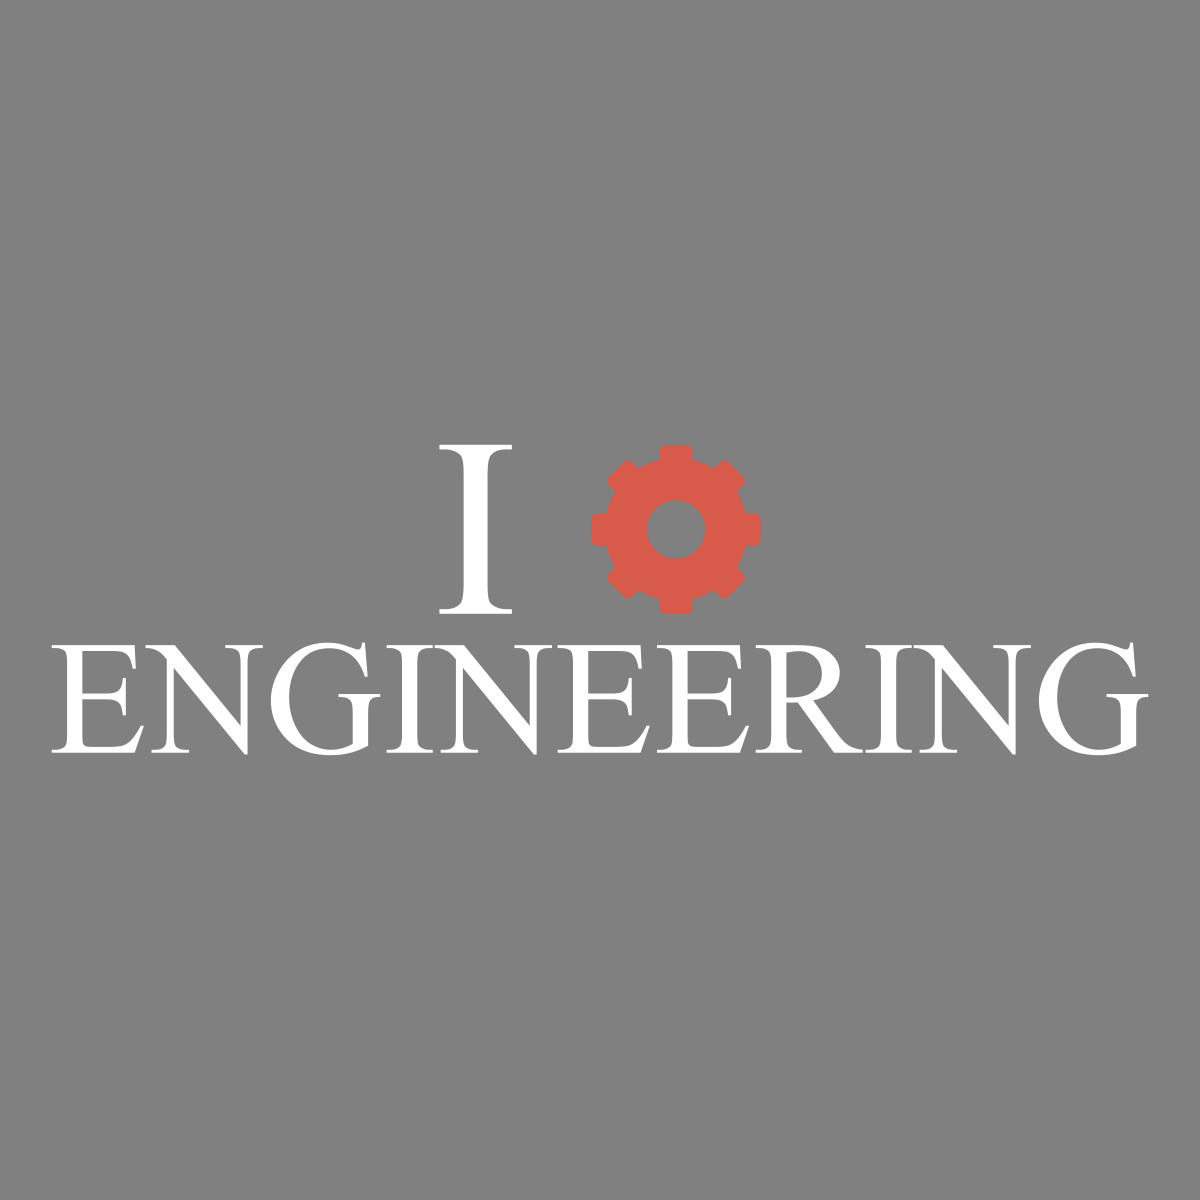 I Gear Engineering - Engineering Outfitters